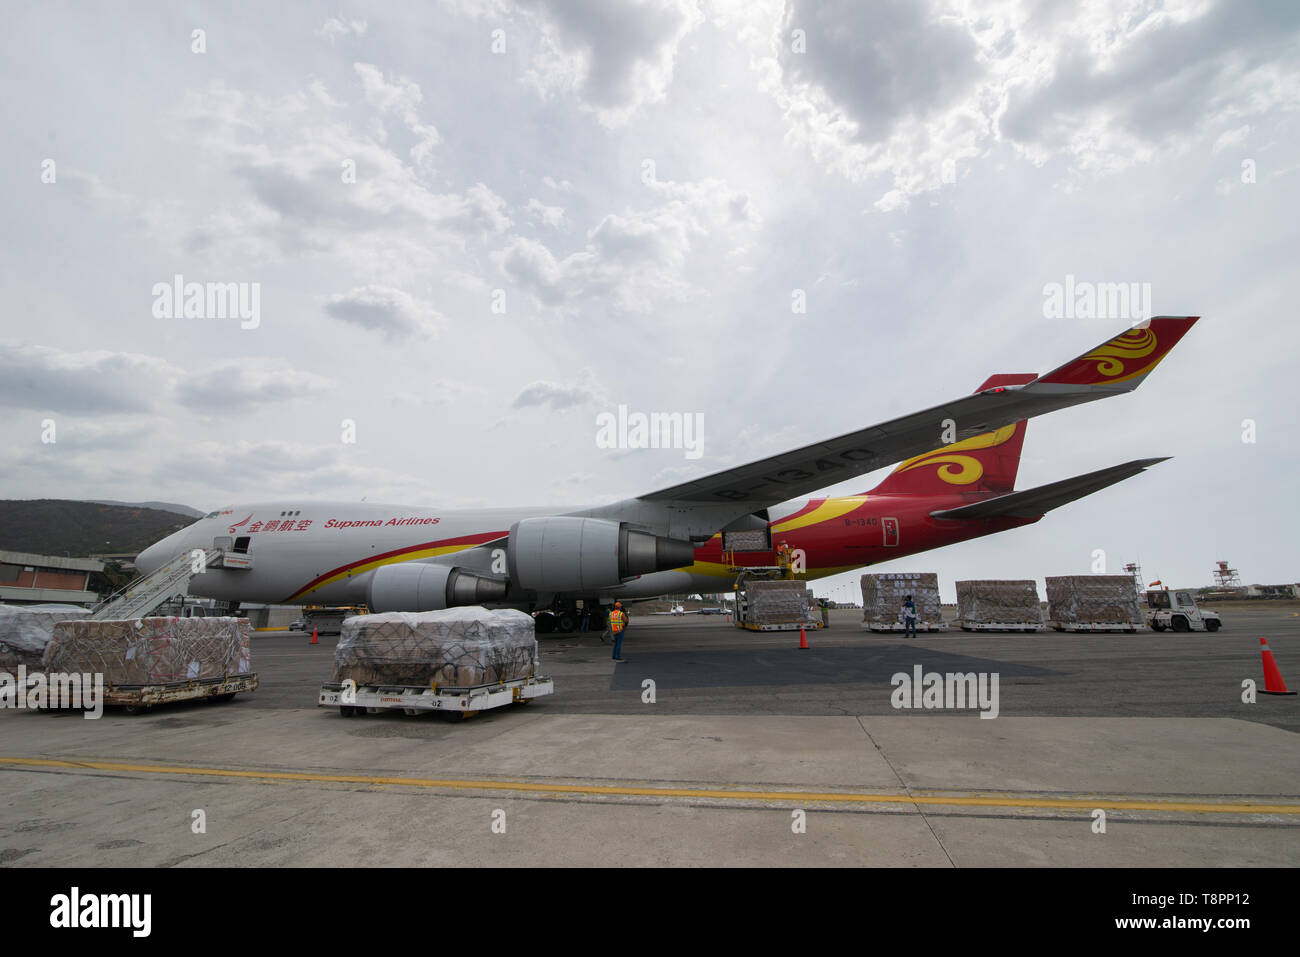 Caracas, Venezuela. 13th May, 2019. The second shipment of medical aid from China arrived at the Simon Bolivar International Airport in Caracas, Venezuela, May 13, 2019. The 71 tonnes of aid mainly consists of medicines and medical supplies. The first batch of medical assistance from China, made up of 65 tonnes of medicines and medical supplies, arrived in Venezuela in March. Credit: Marcos Salgado/Xinhua/Alamy Live News Stock Photo